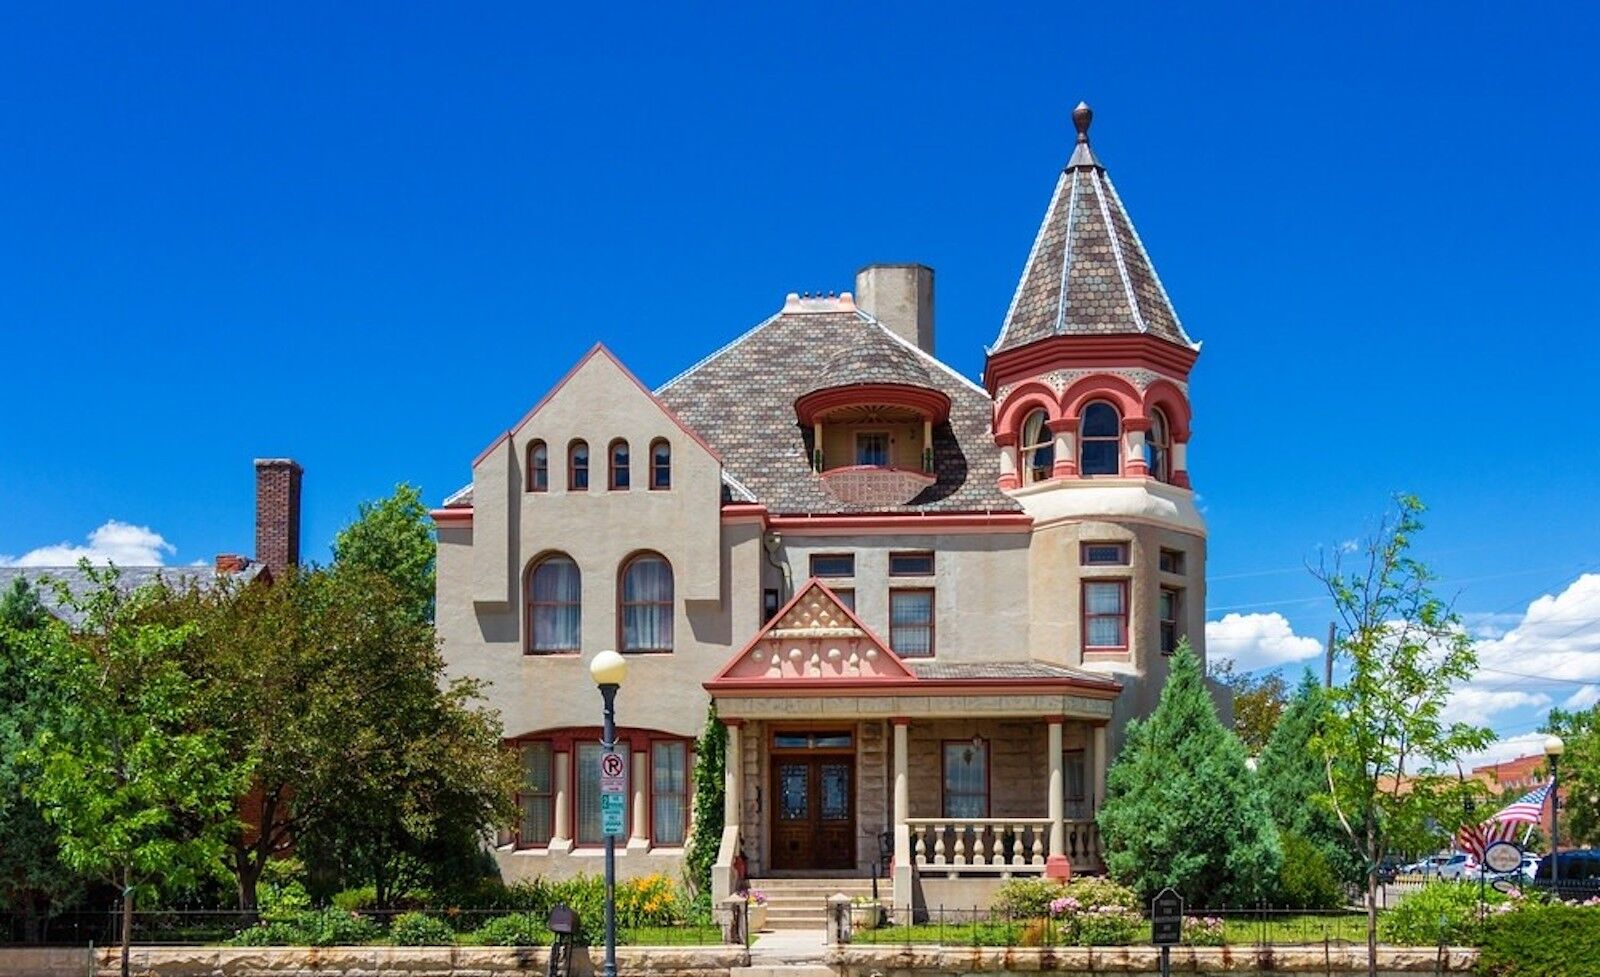 The Nagle Warren Mansion is one of the best places to stay in Cheyenne, Wyoming